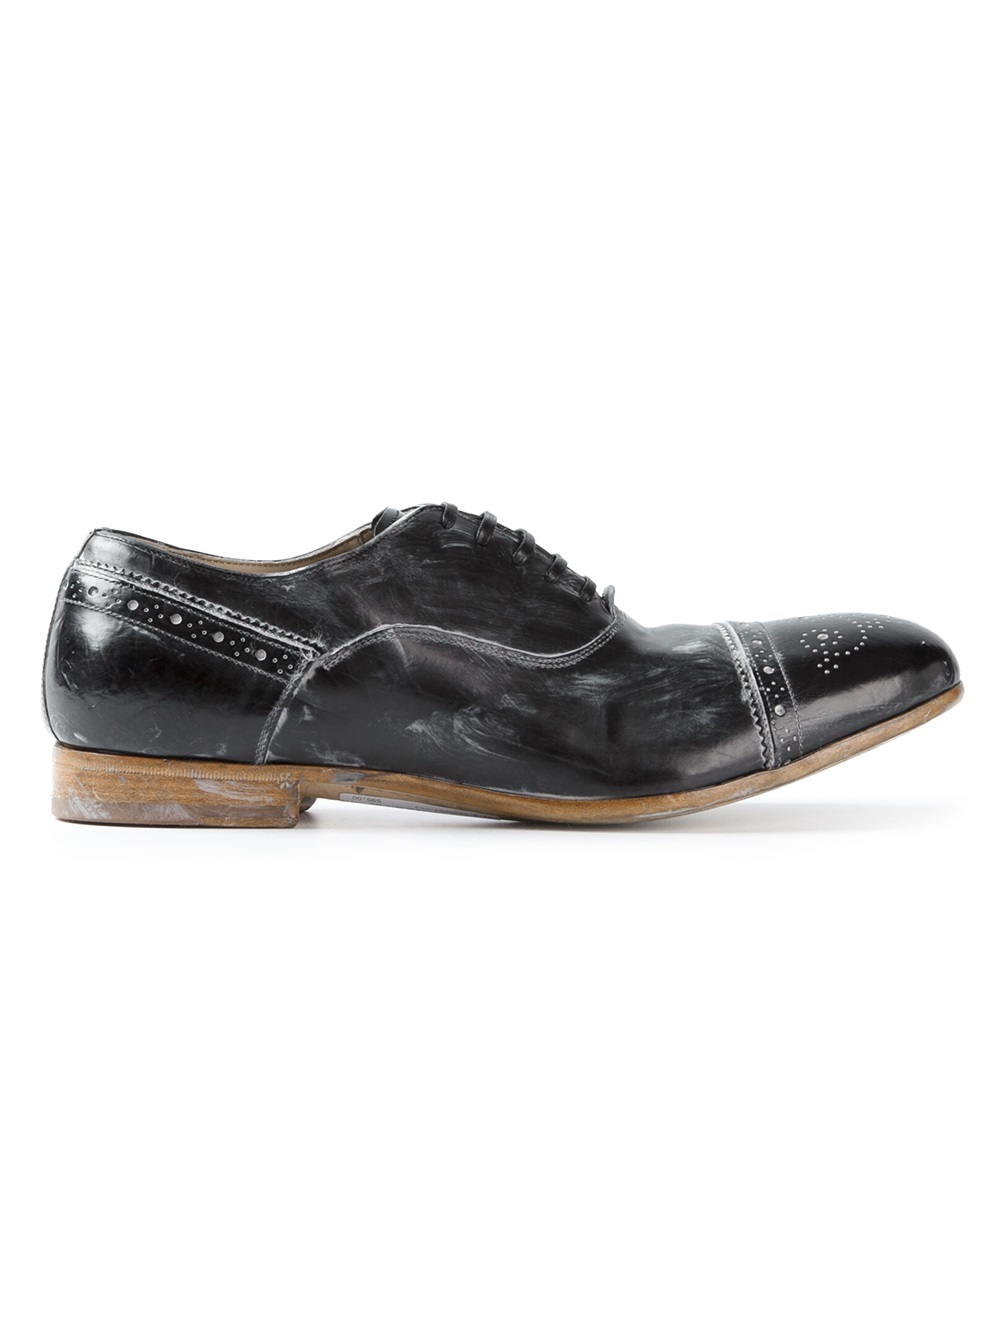 Dolce & gabbana Laceup Shoe in Gray for Men (Black) | Lyst